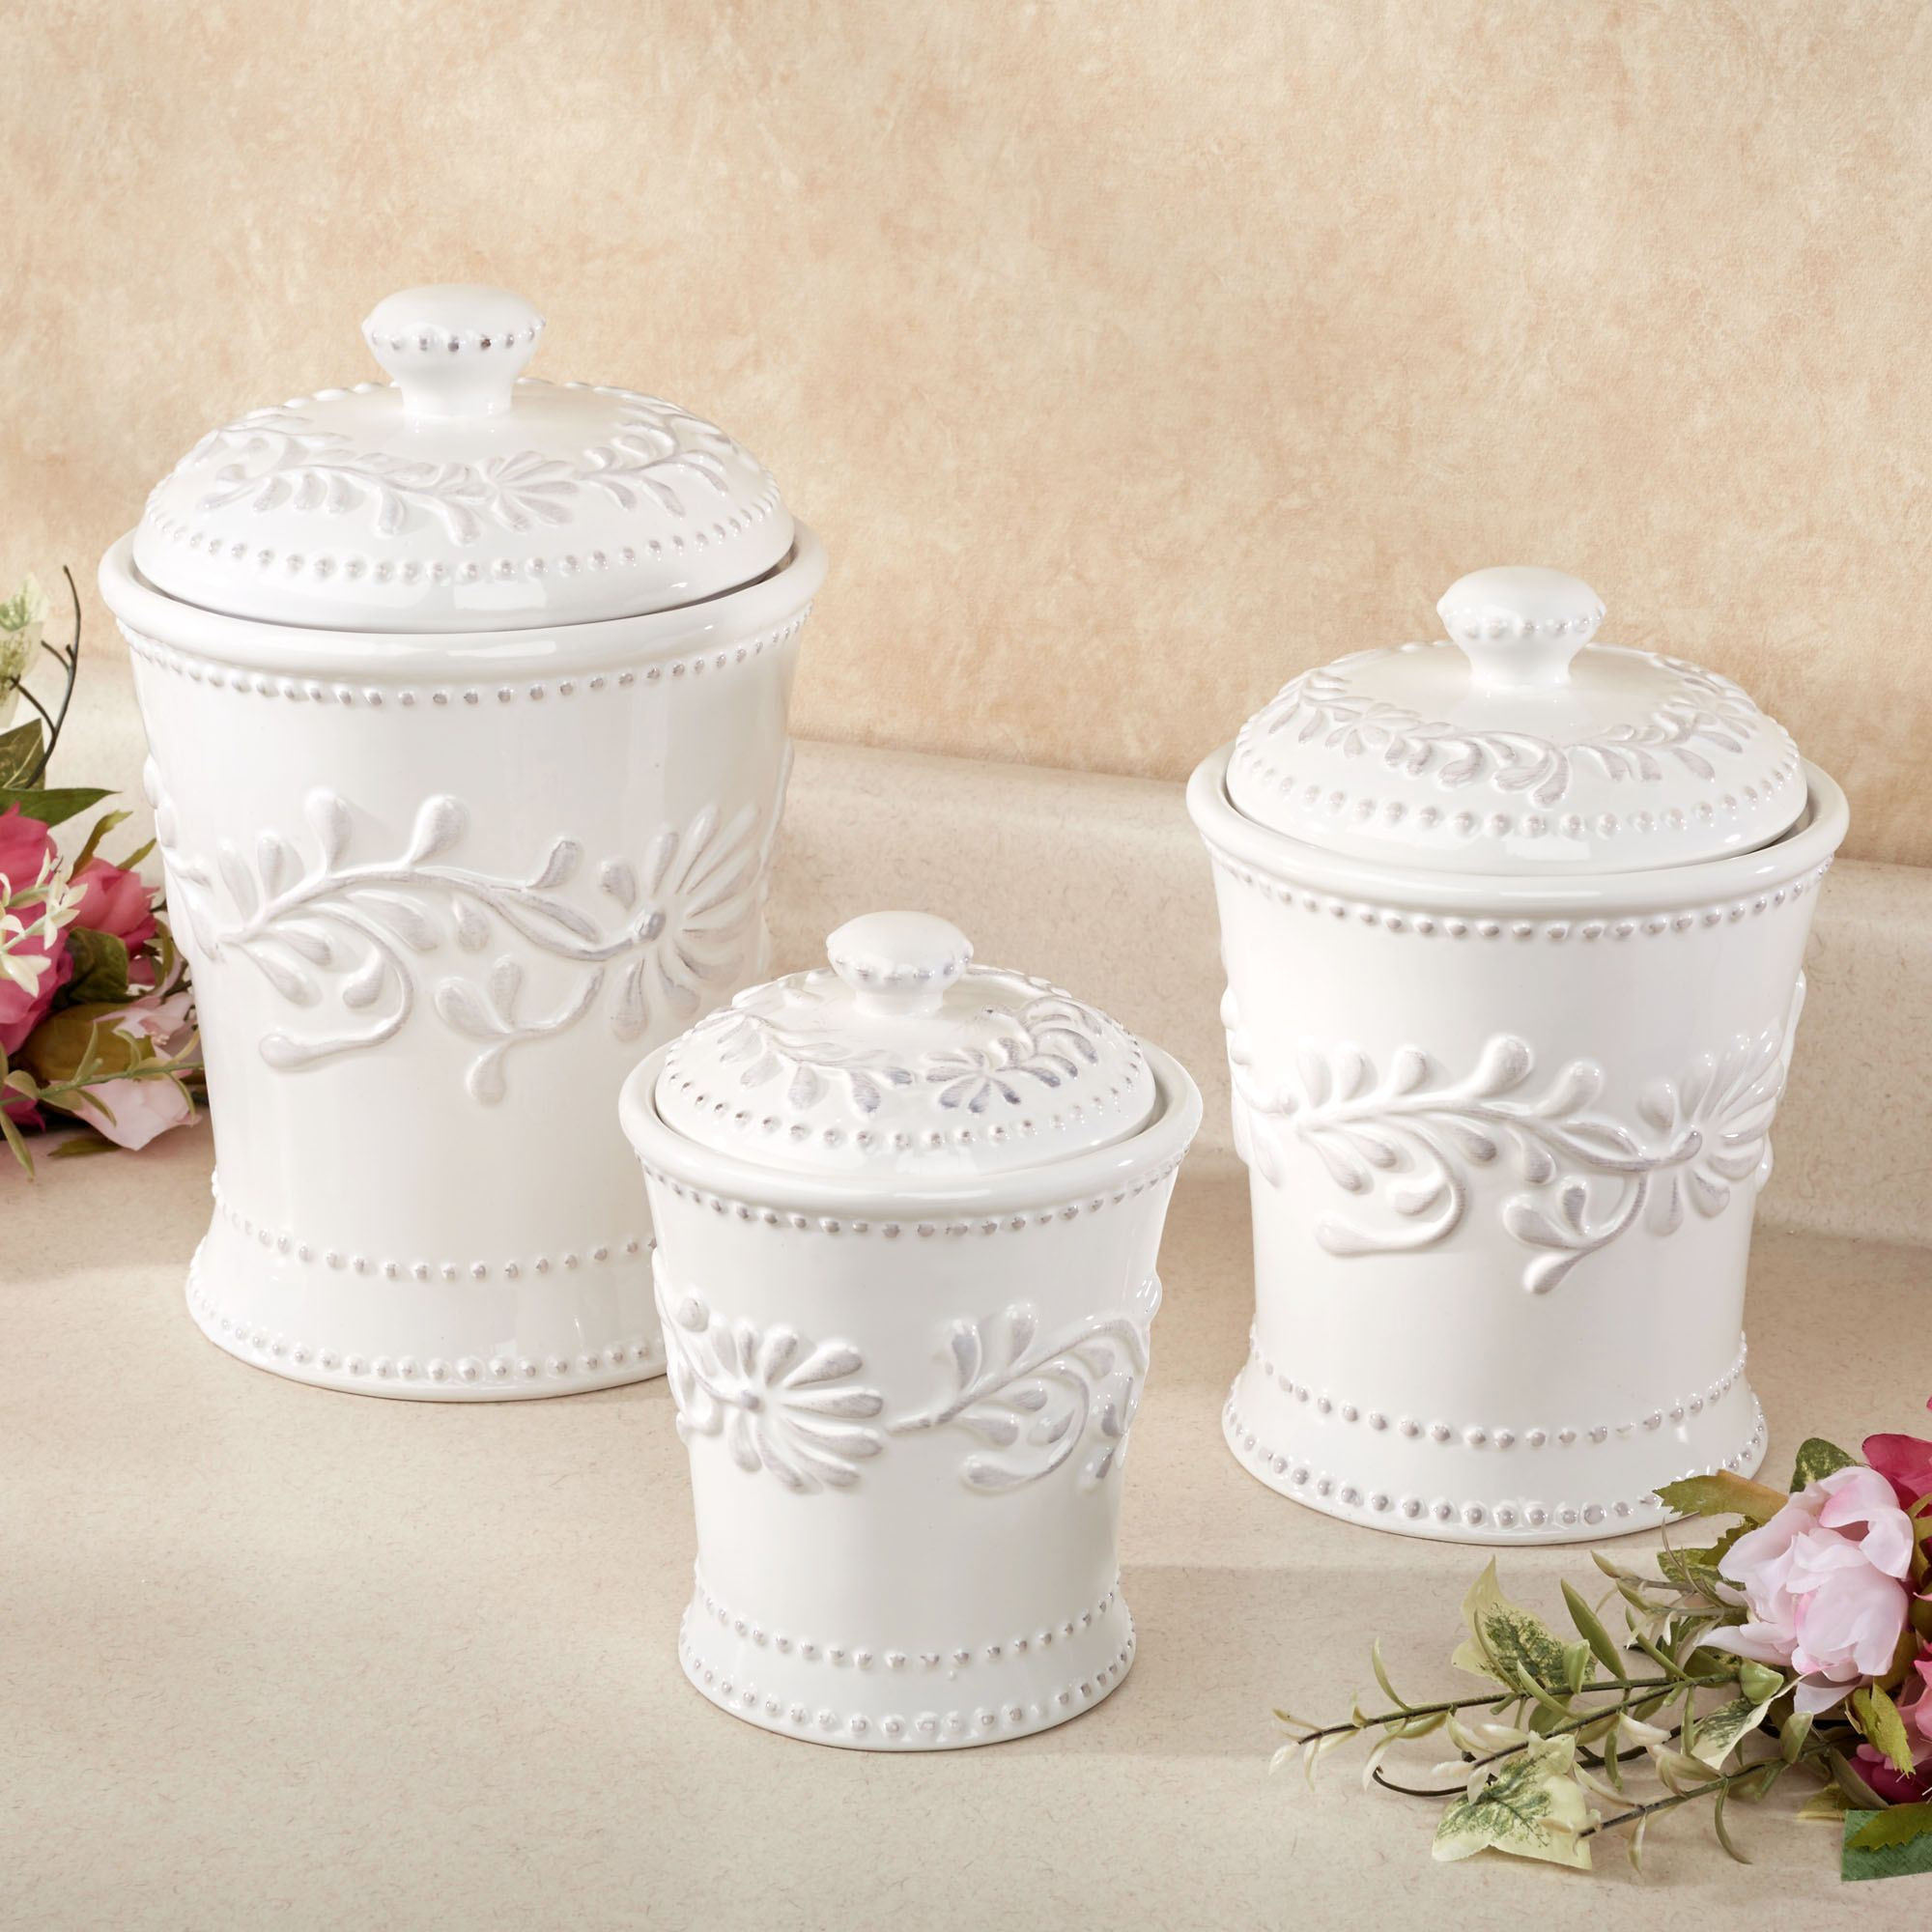 White Kitchen Canisters
 Anca Leaf White Kitchen Canister Set